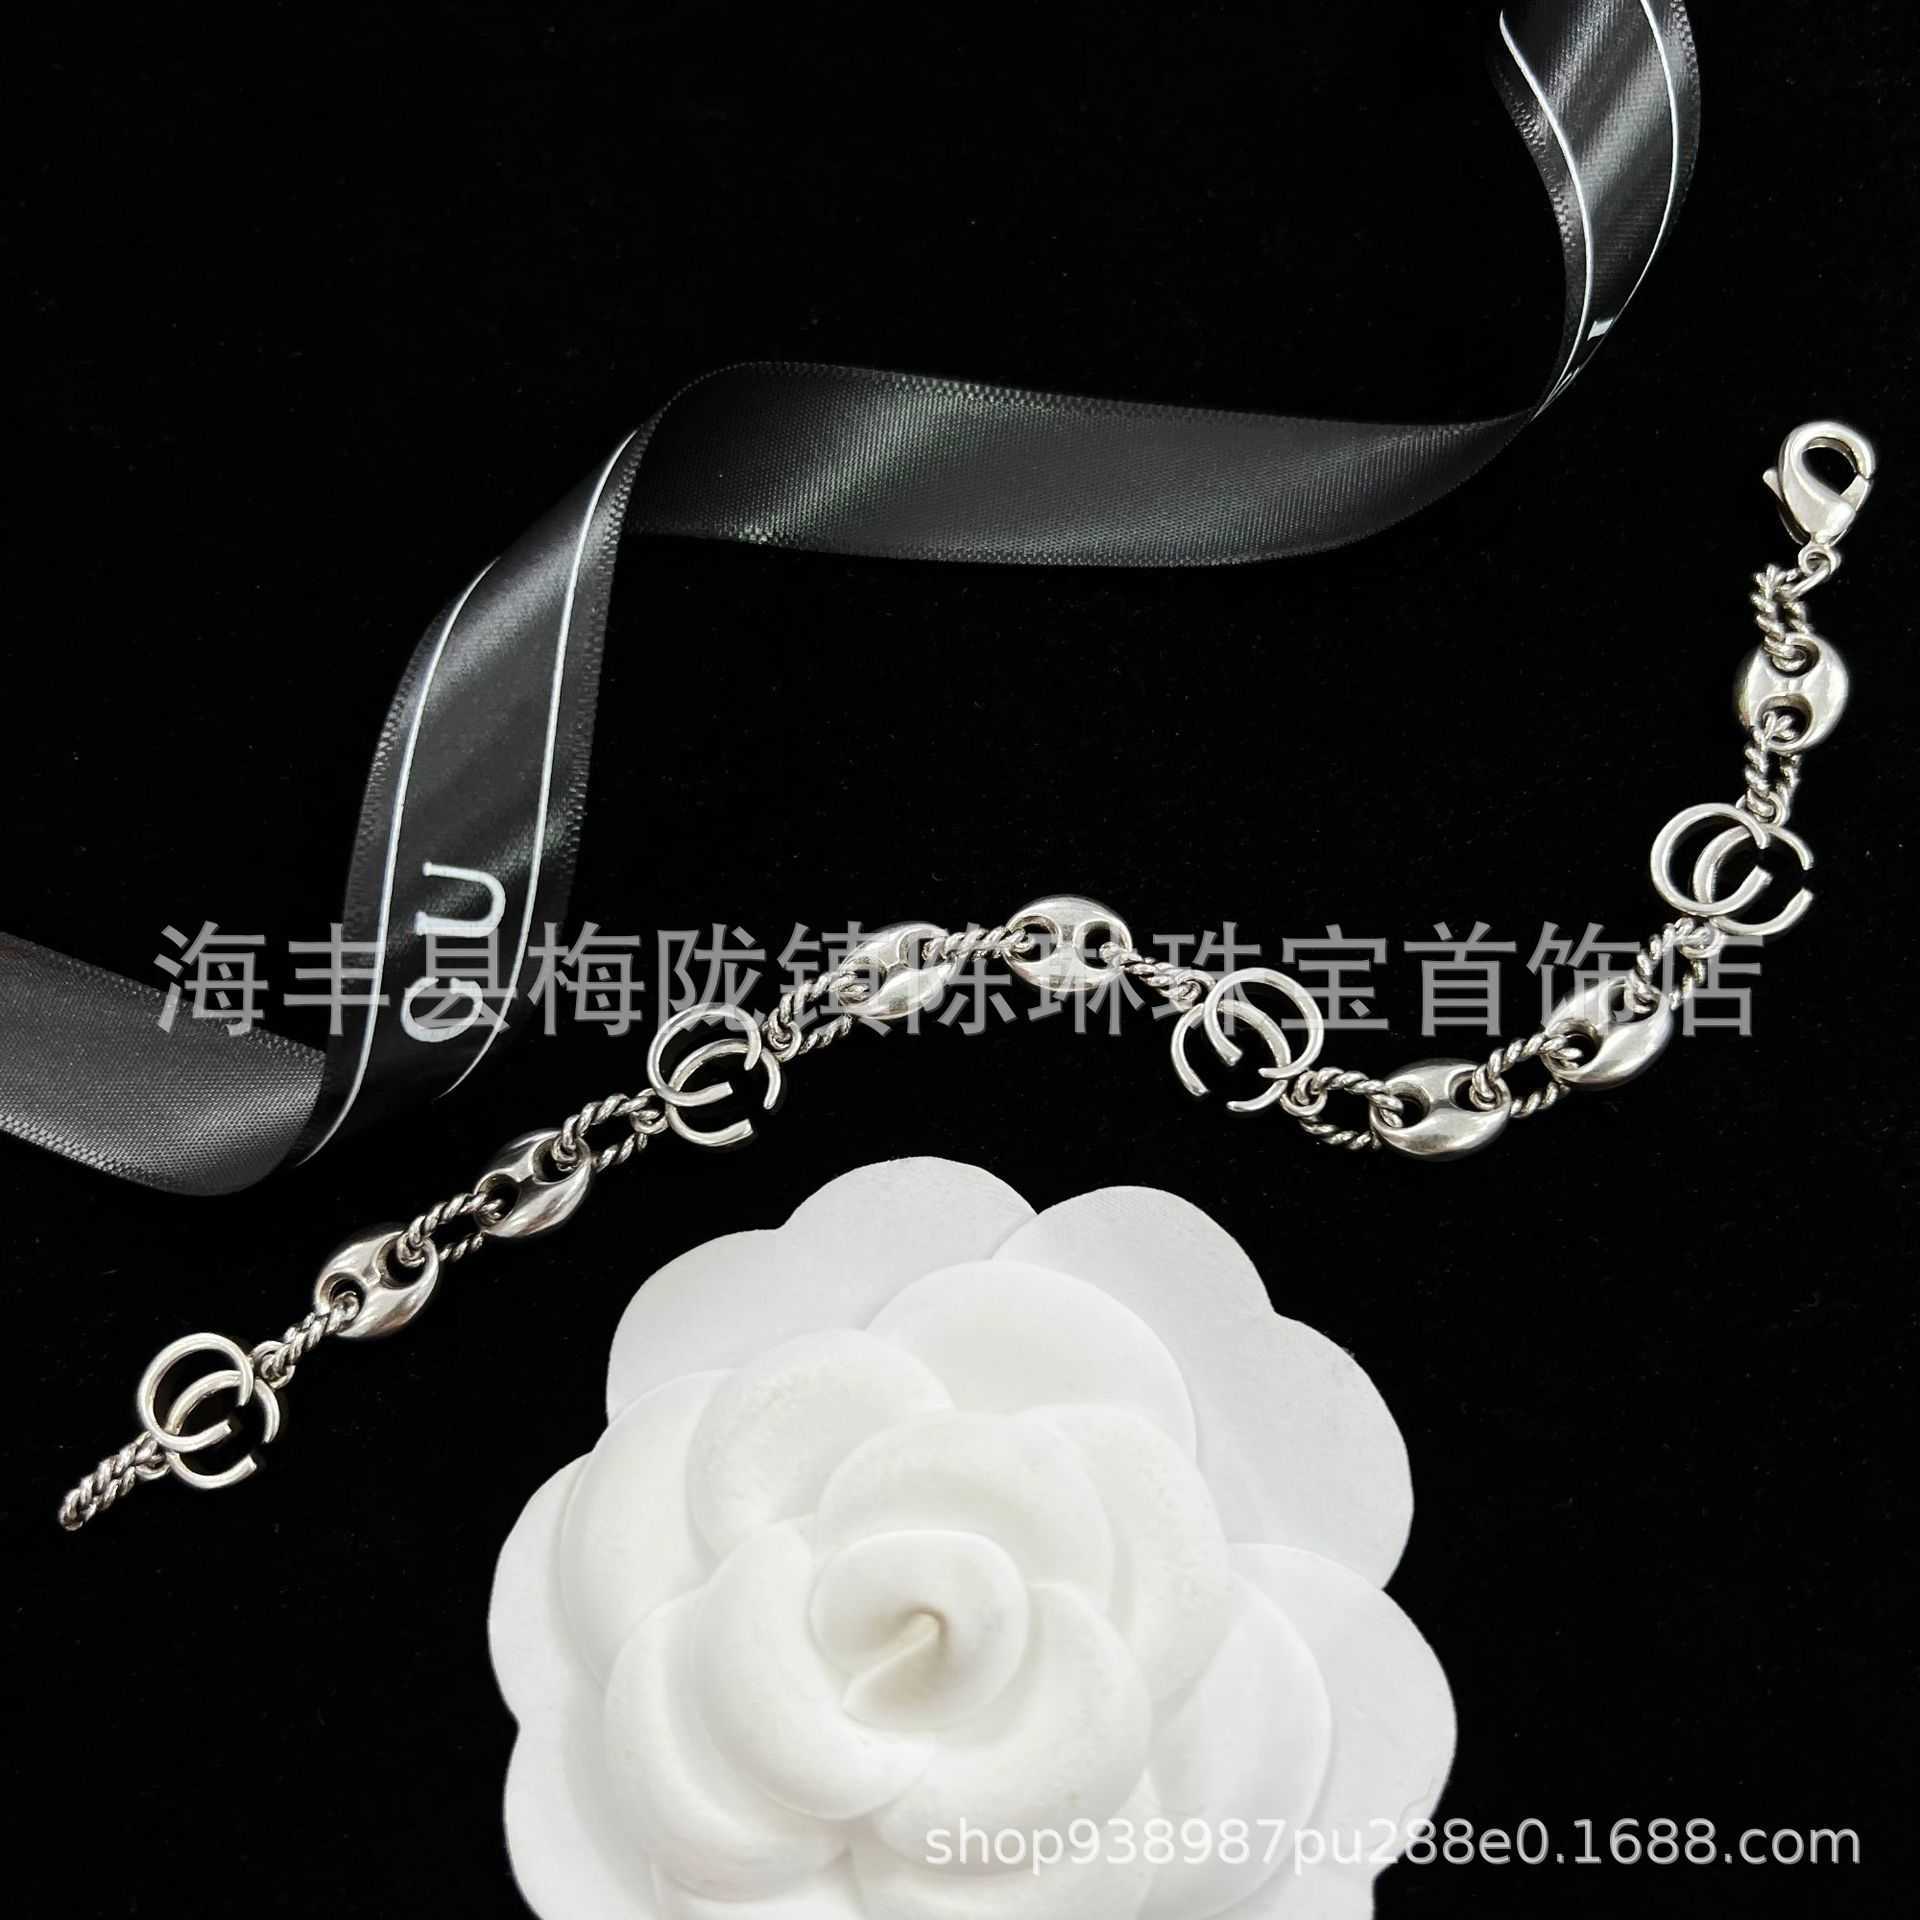 Top designer jewelry Silver Chain Fried Dough Twists Thread Hollow Bracelet Make Old Personalized Men's and Women's Same